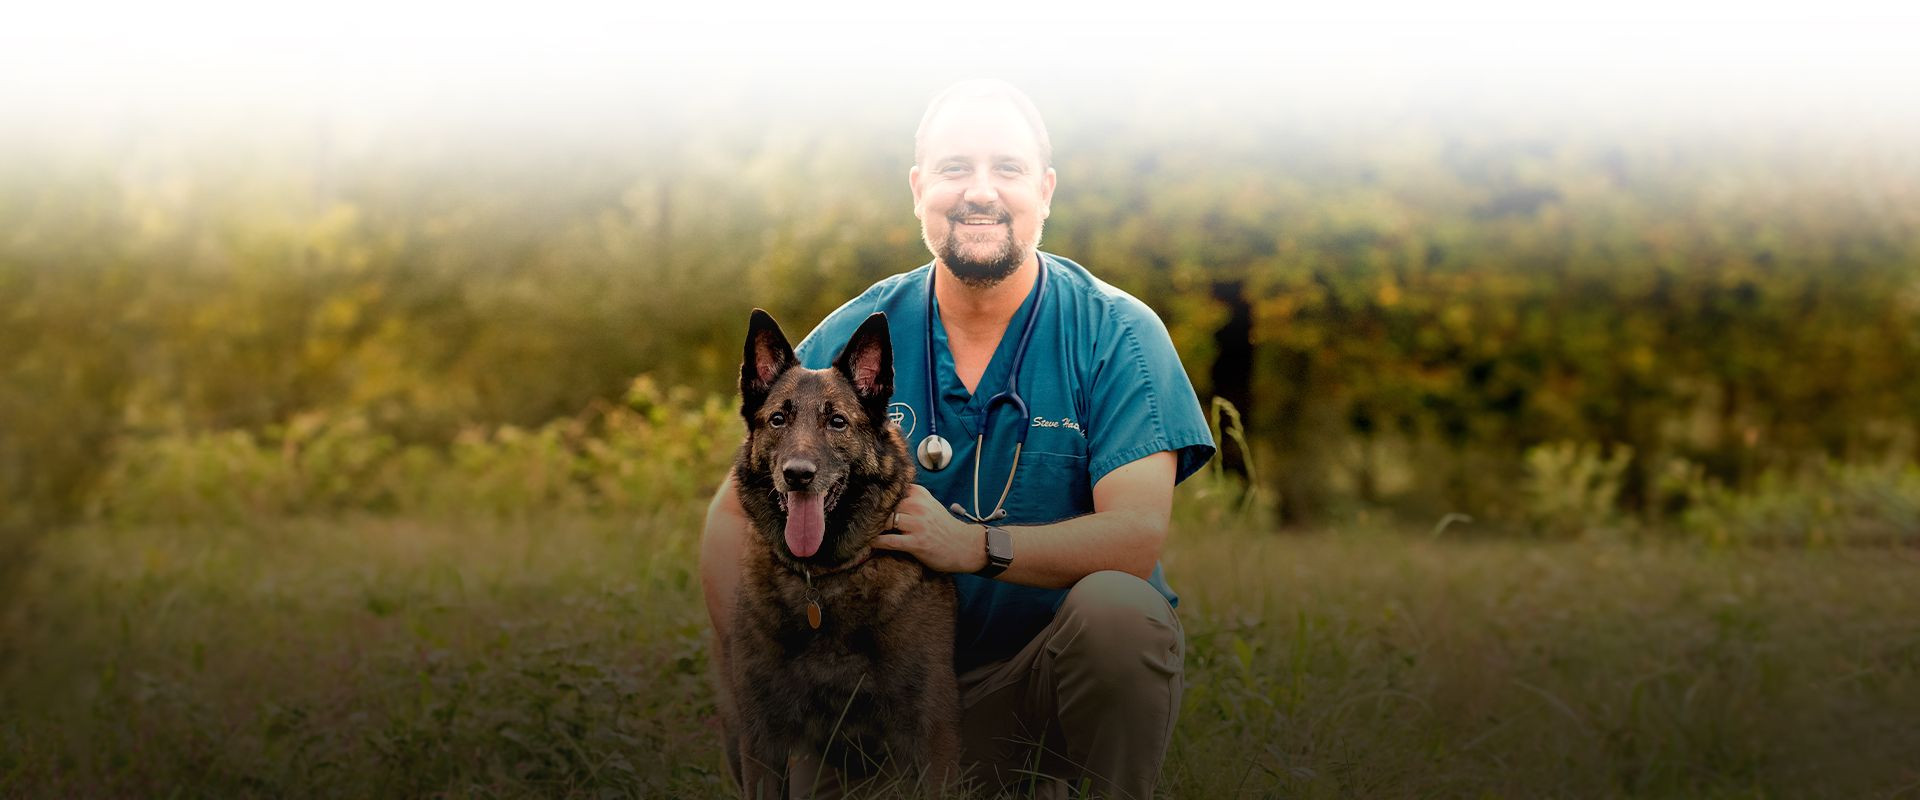 westside veterinary hospital veterinarian with his dog in nature